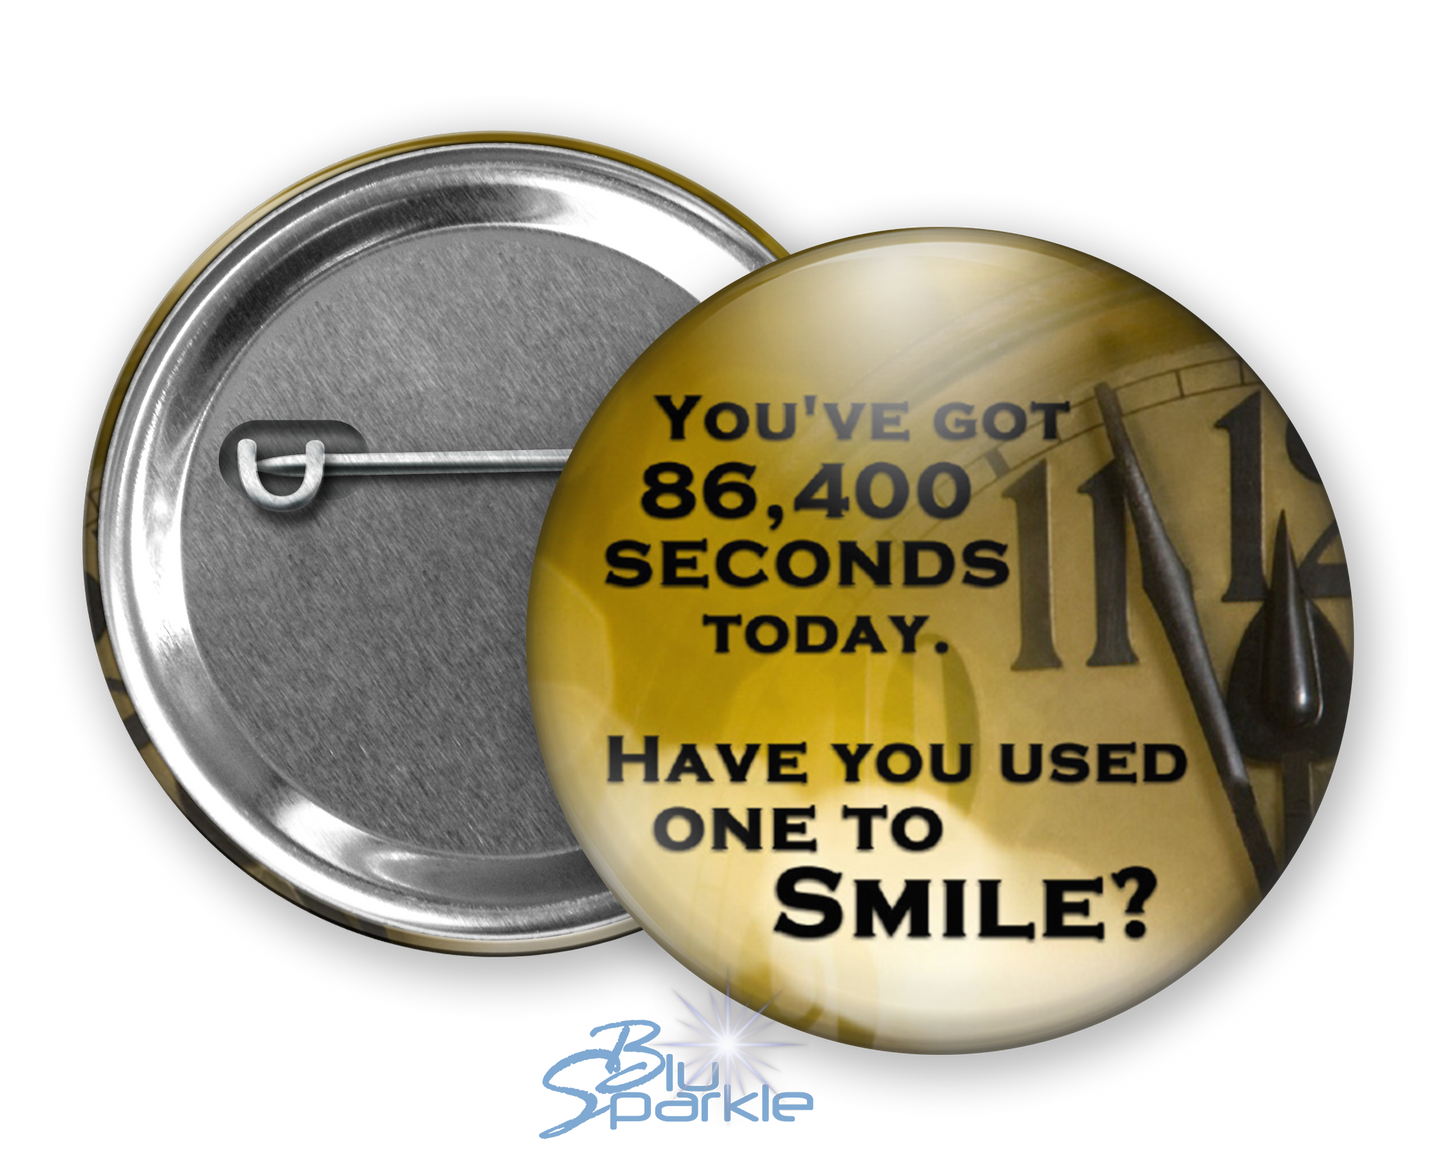 You've got 86,400 seconds today. Have you used one to smile? - Pinback Buttons